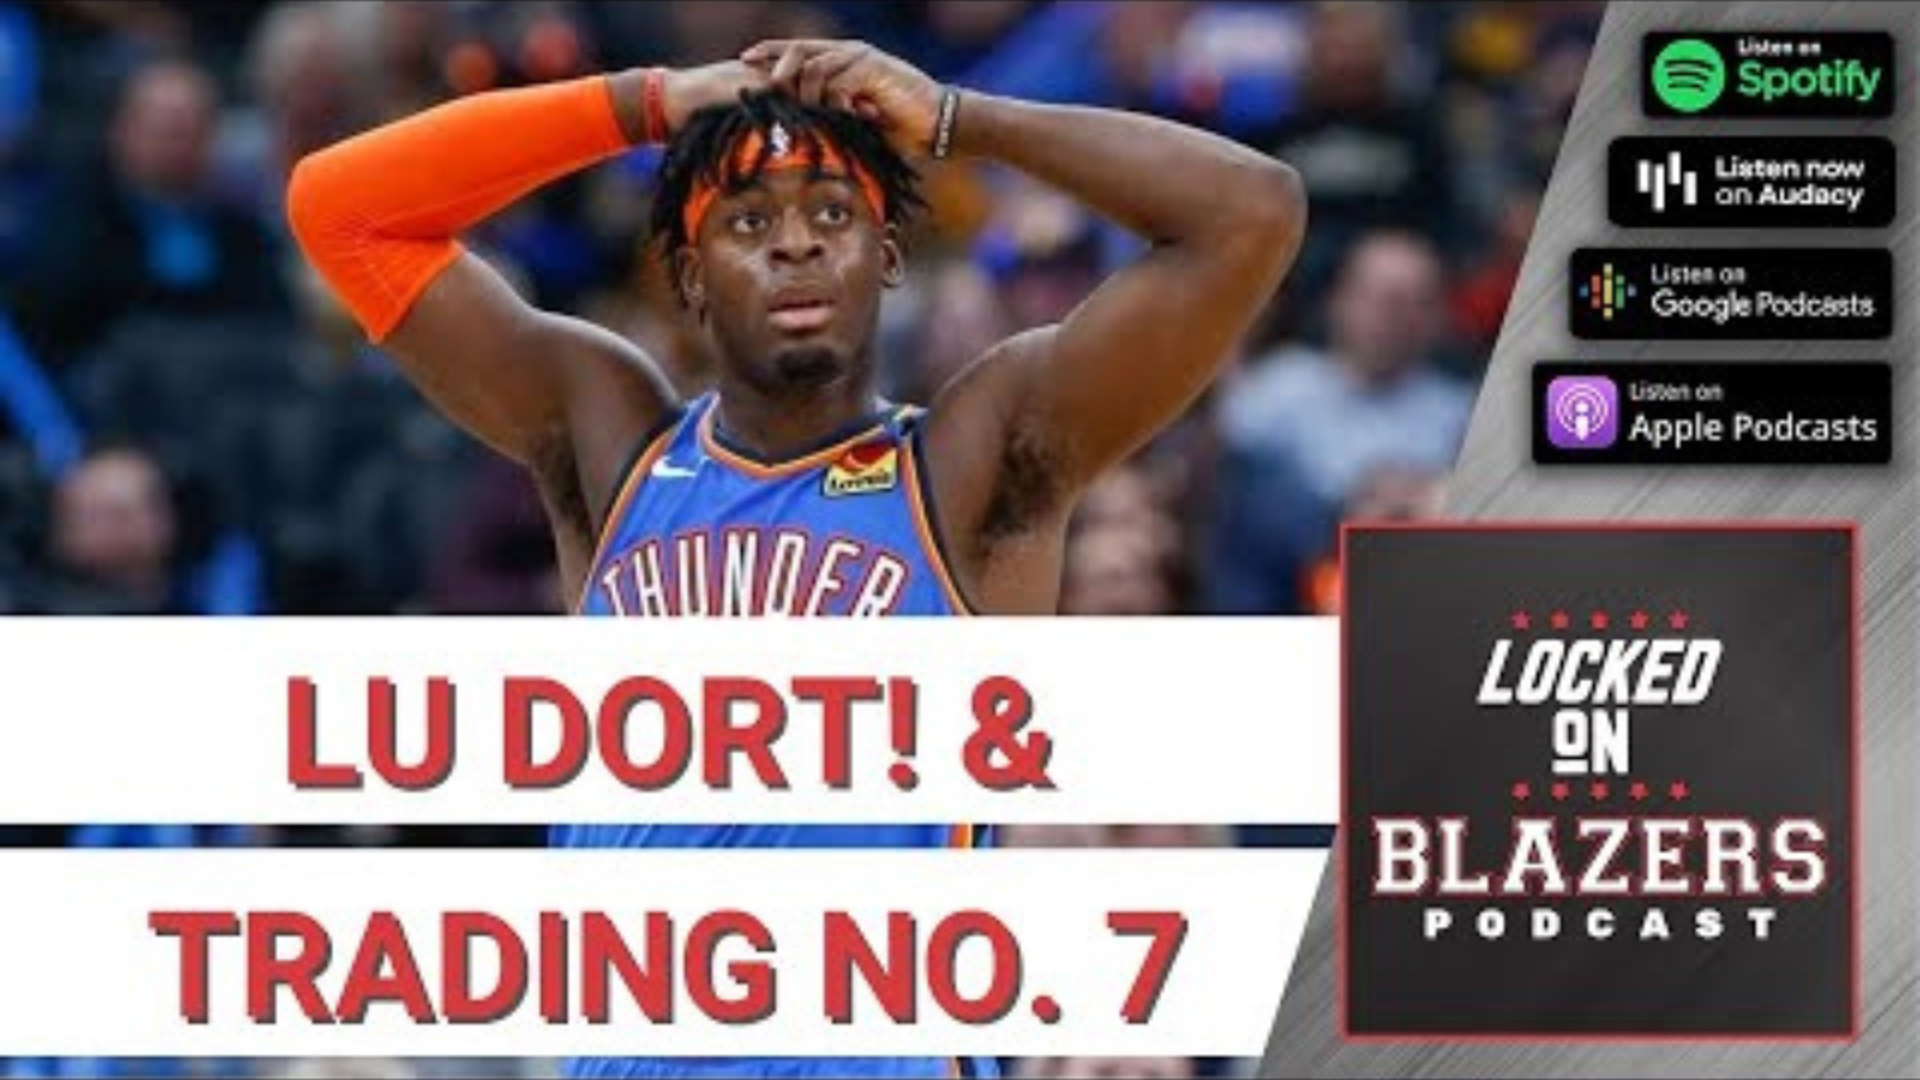 The Portland Trail Blazers are interested in trading for Oklahoma City guard Lu Dort, according to Jake Fisher of Bleacher Report.